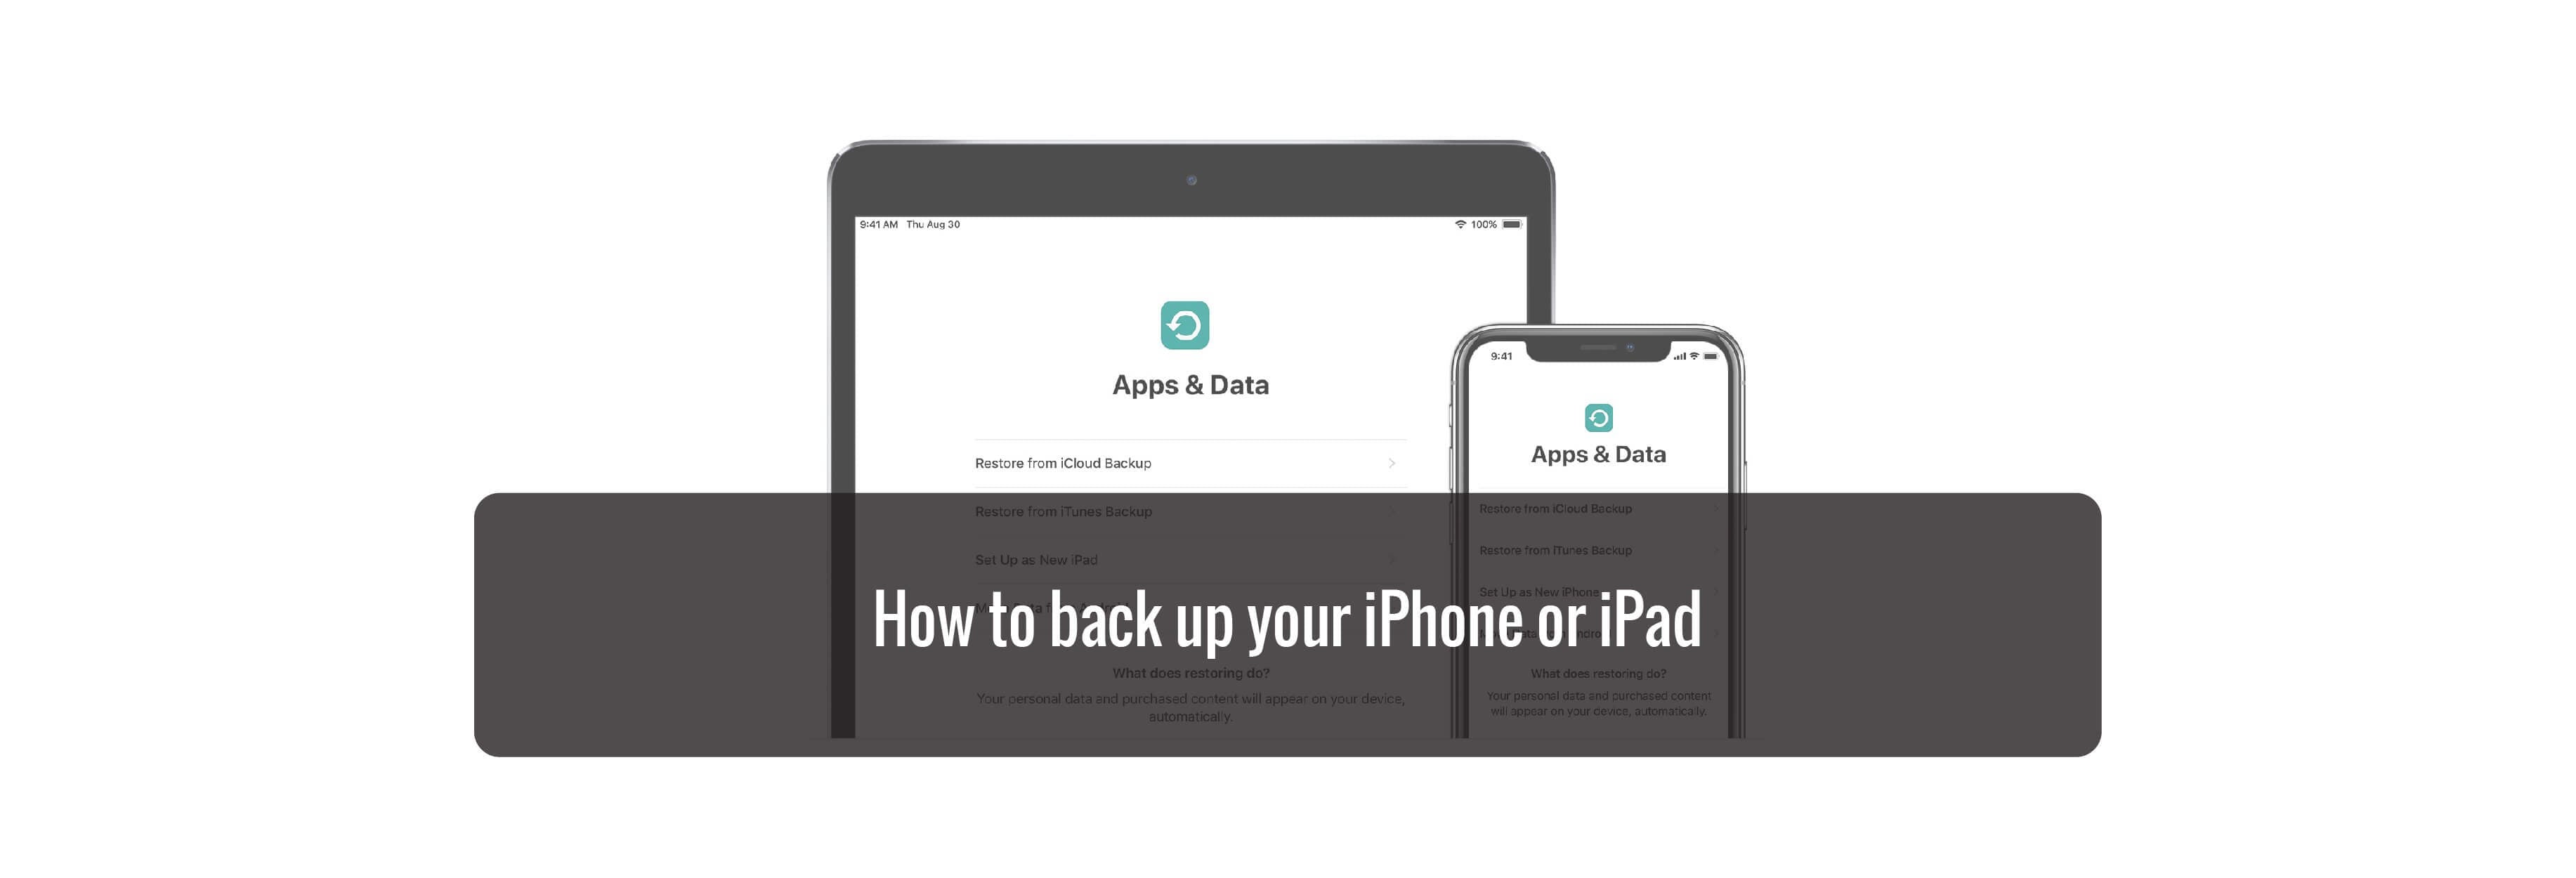 How to back up your iPhone or iPad